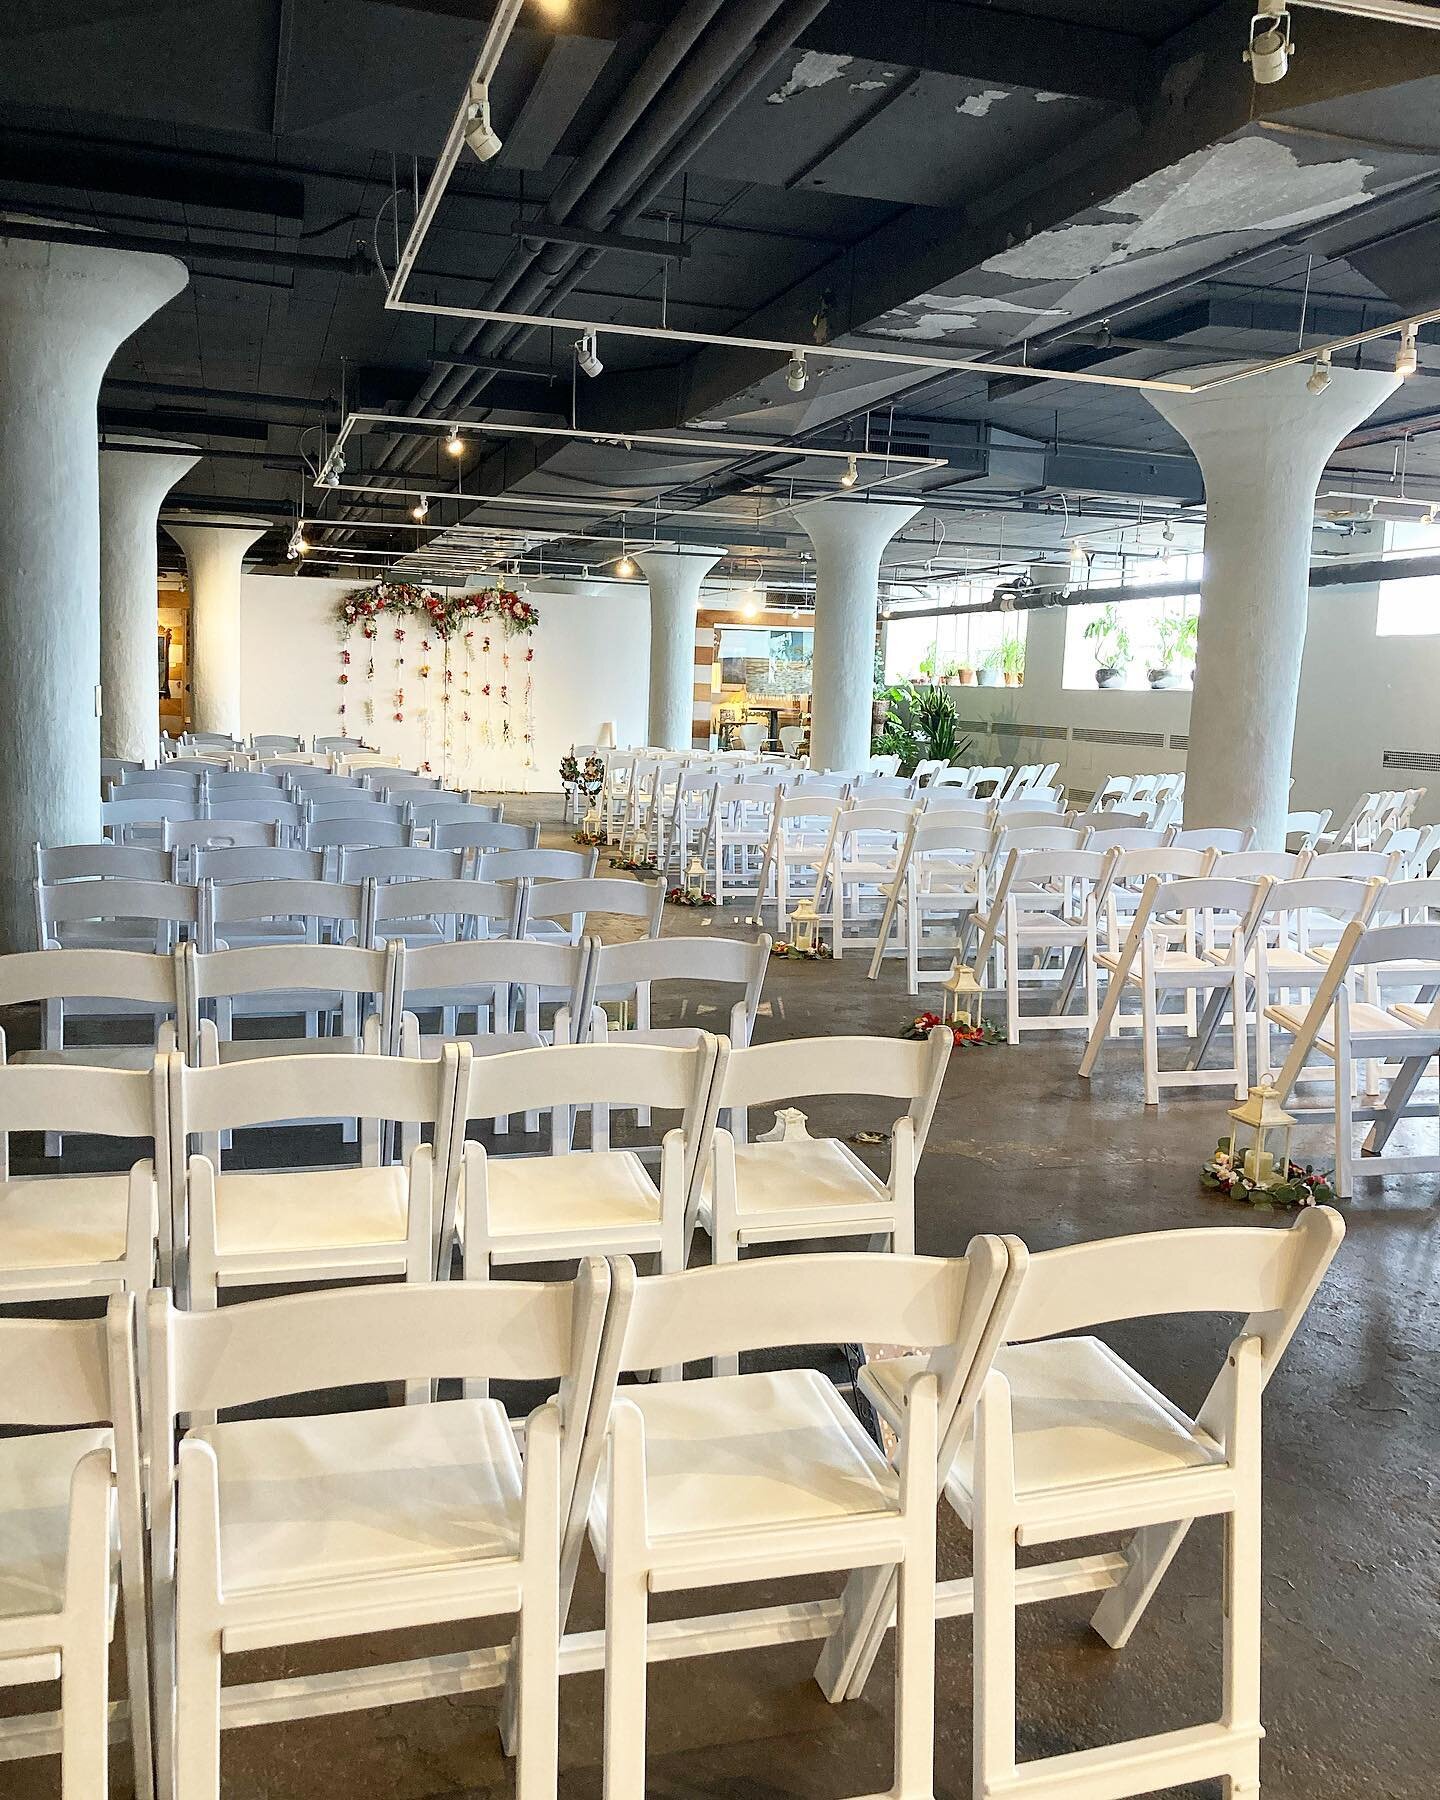 All the congratulations @mojojojojohnson and Gus!We&rsquo;re so thrilled you celebrated your lovely wedding ceremony and reception at @78ststudios ❤️

pictured: Ramp Level ceremony, smARTspace reception